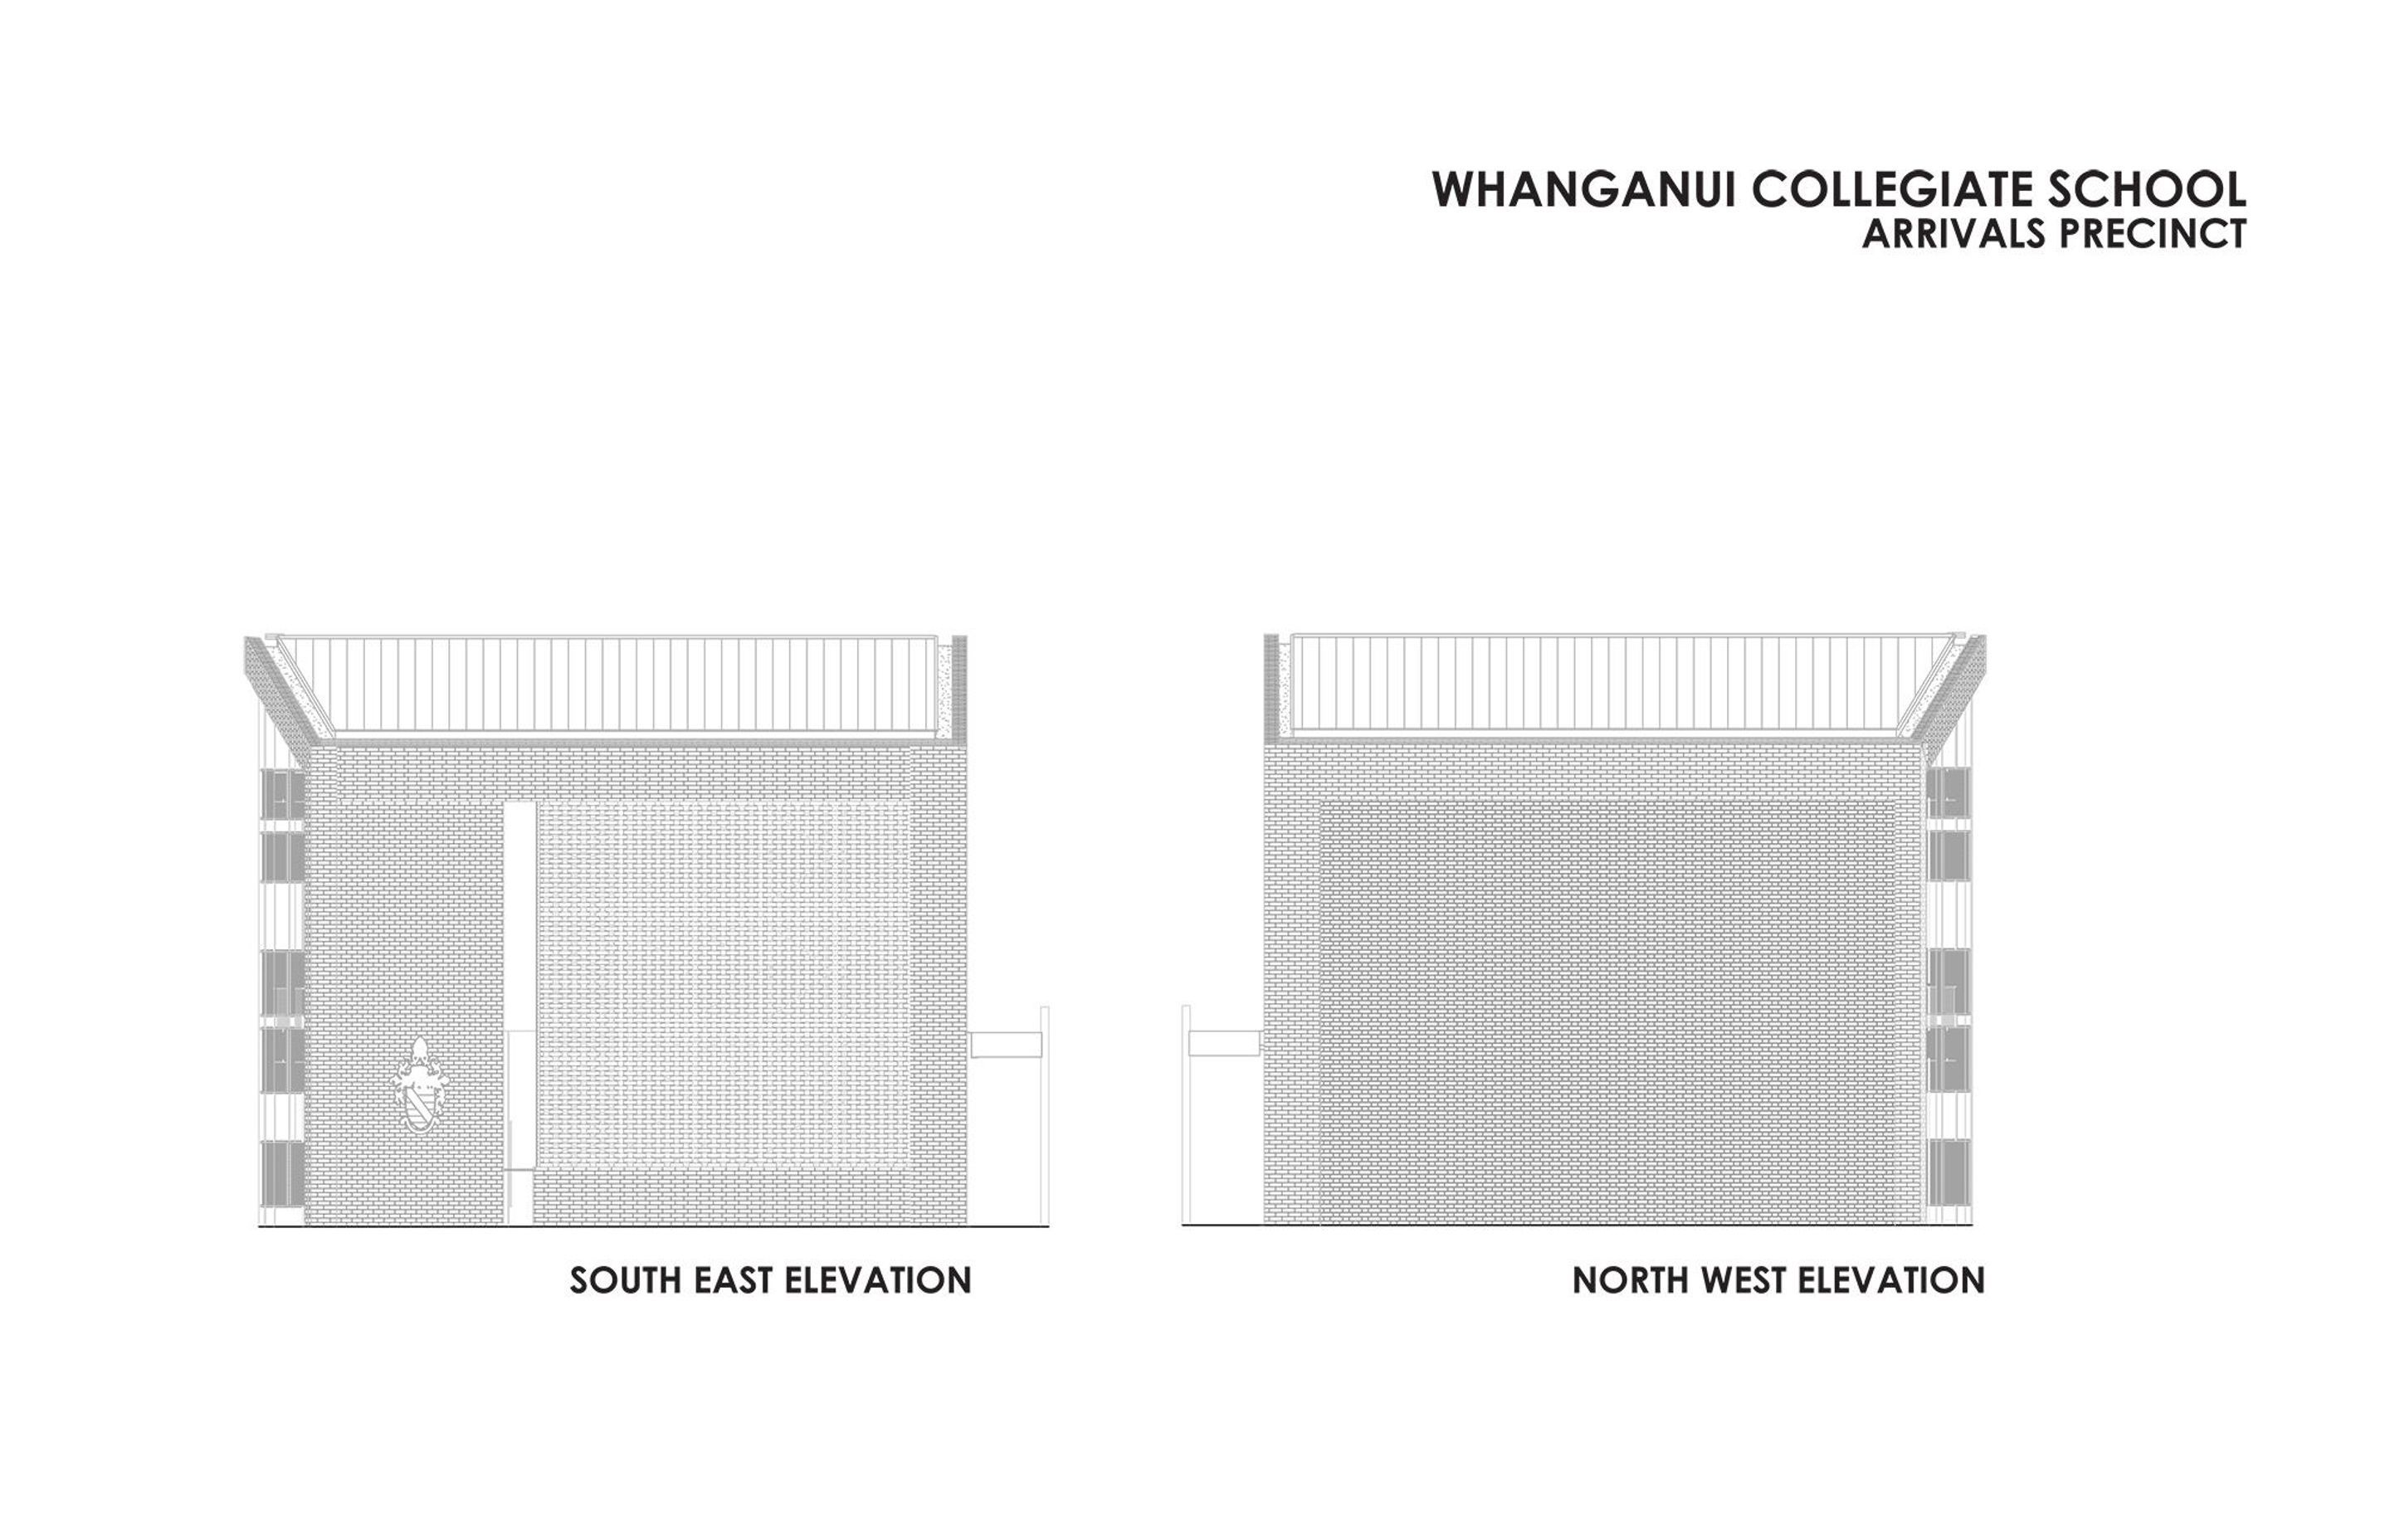 The admistration and arrivals precinct – south-east and north-east elevations.